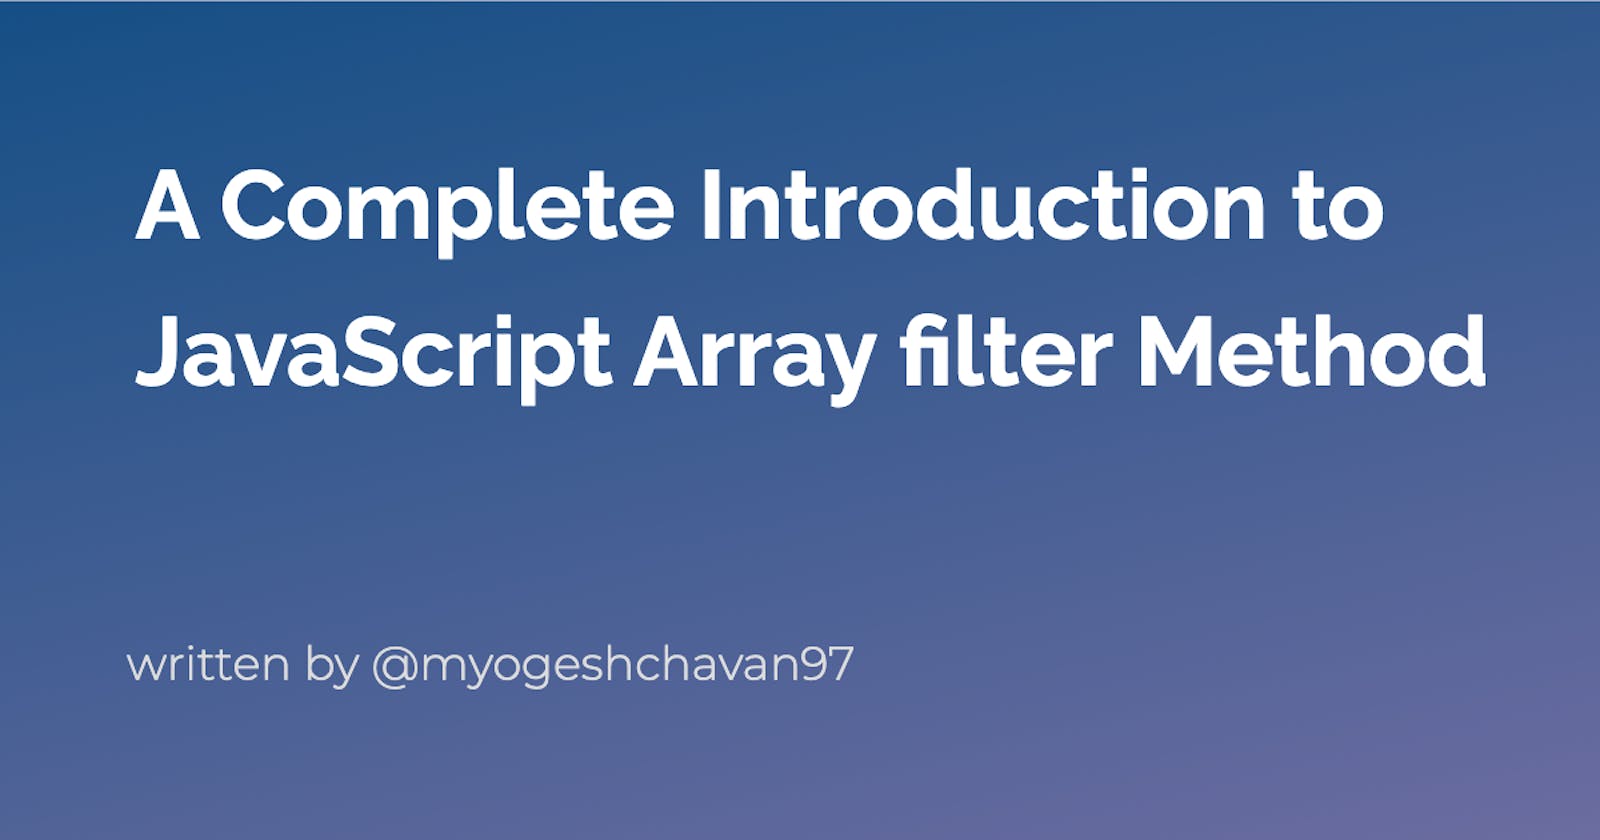 A Complete Introduction to JavaScript Array filter Method